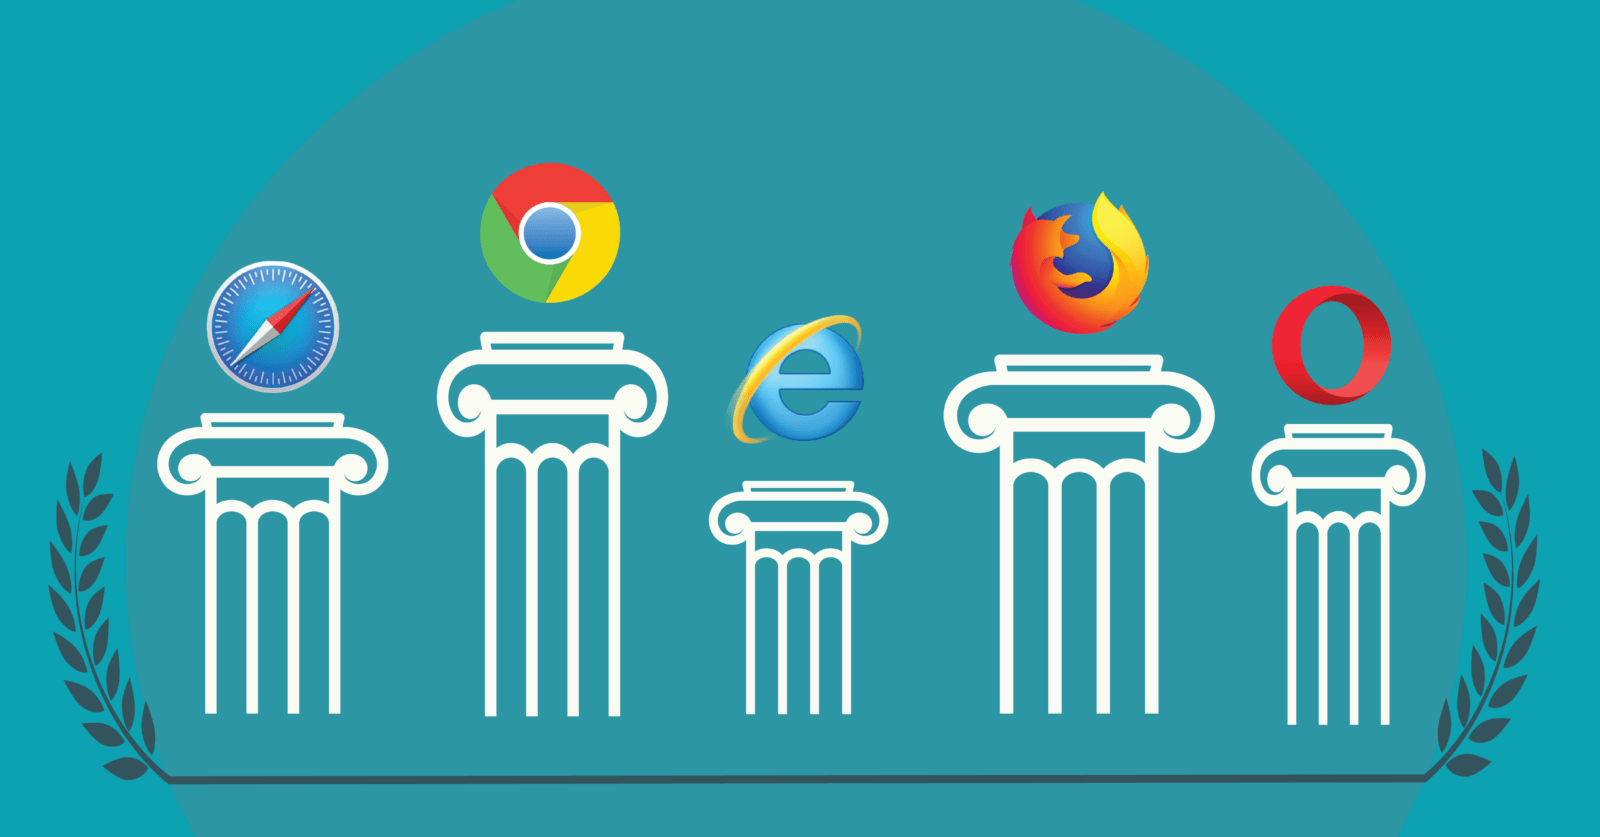 The Fastest and Most Secure Web Browser